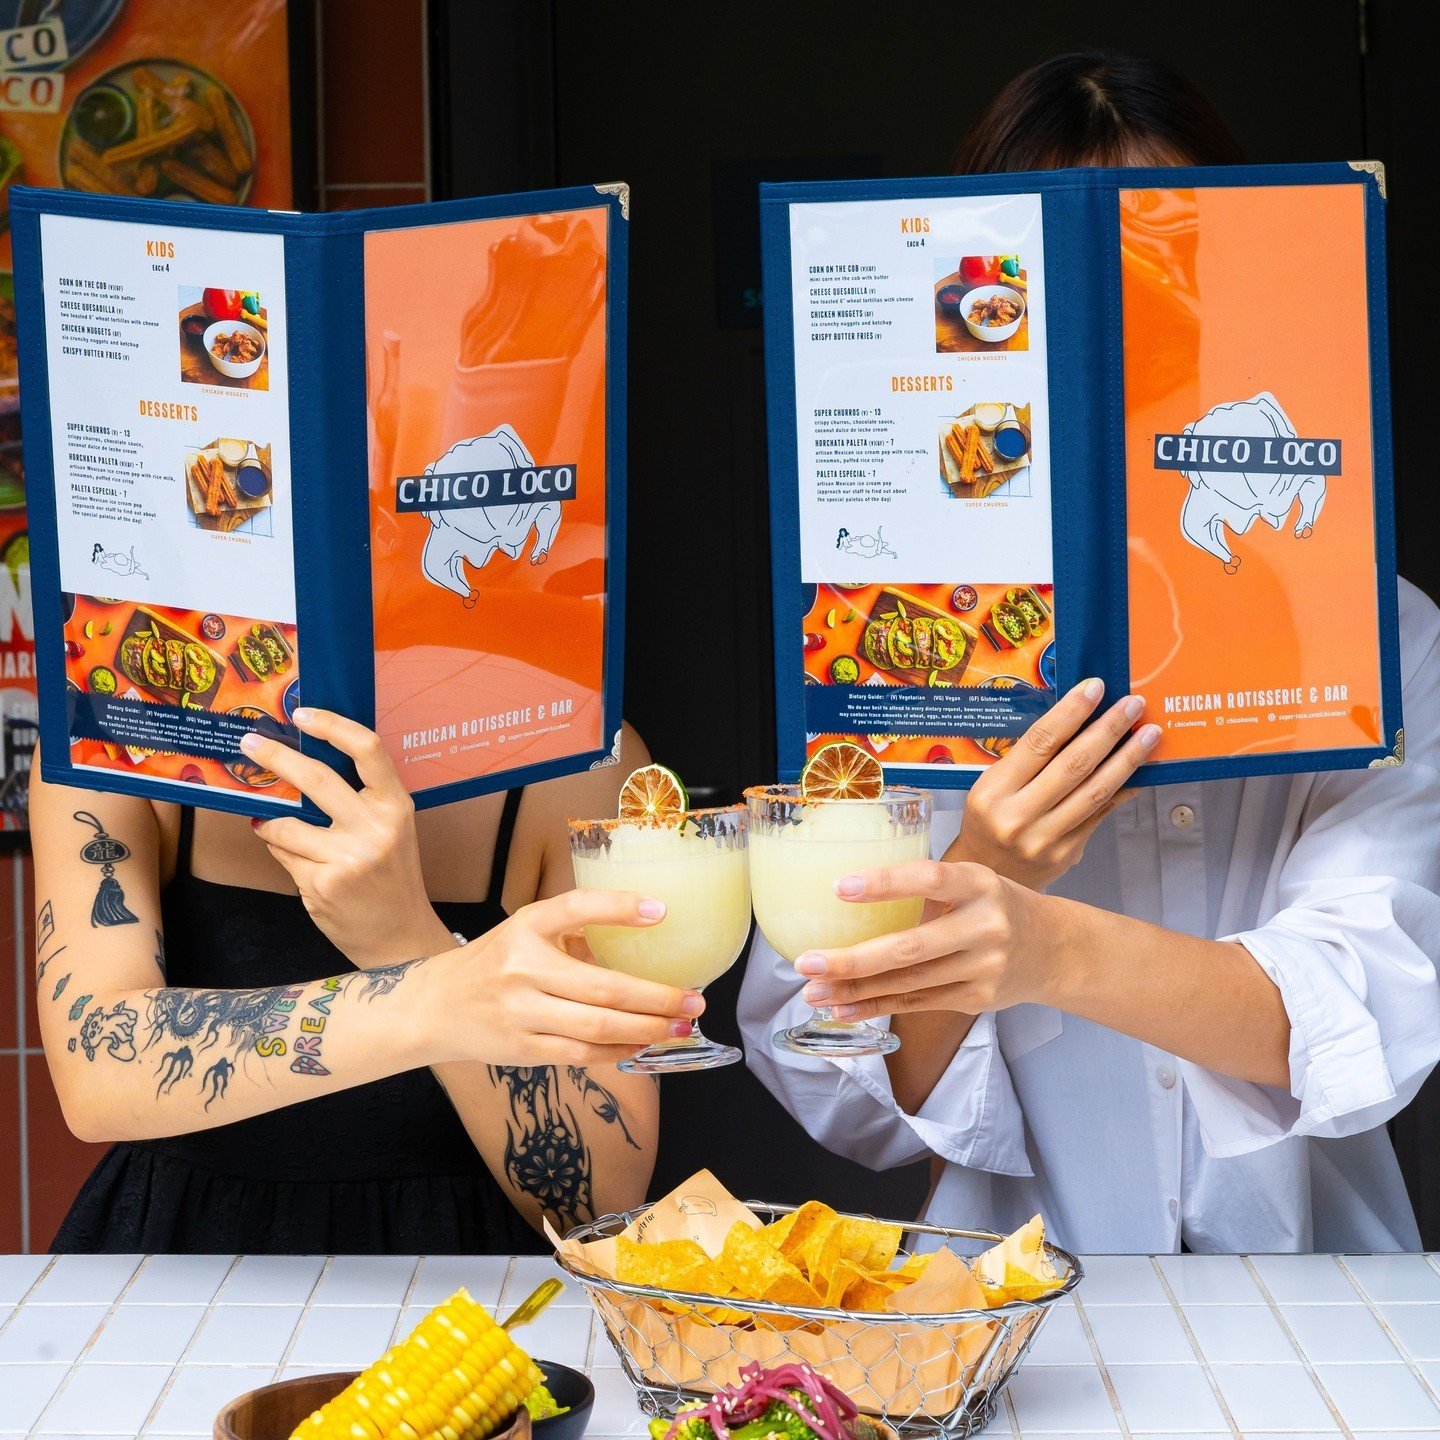 Fancy a cheeky tipple, amigos? Swing by Chico Loco for our El Loco Hour! Every day until 7 pm, we&rsquo;re serving up margs, beers, and vino, all for just $10 🍷 It's the perfect way to kick back after a long day&mdash;sipping on a Frozen Lime Marg t